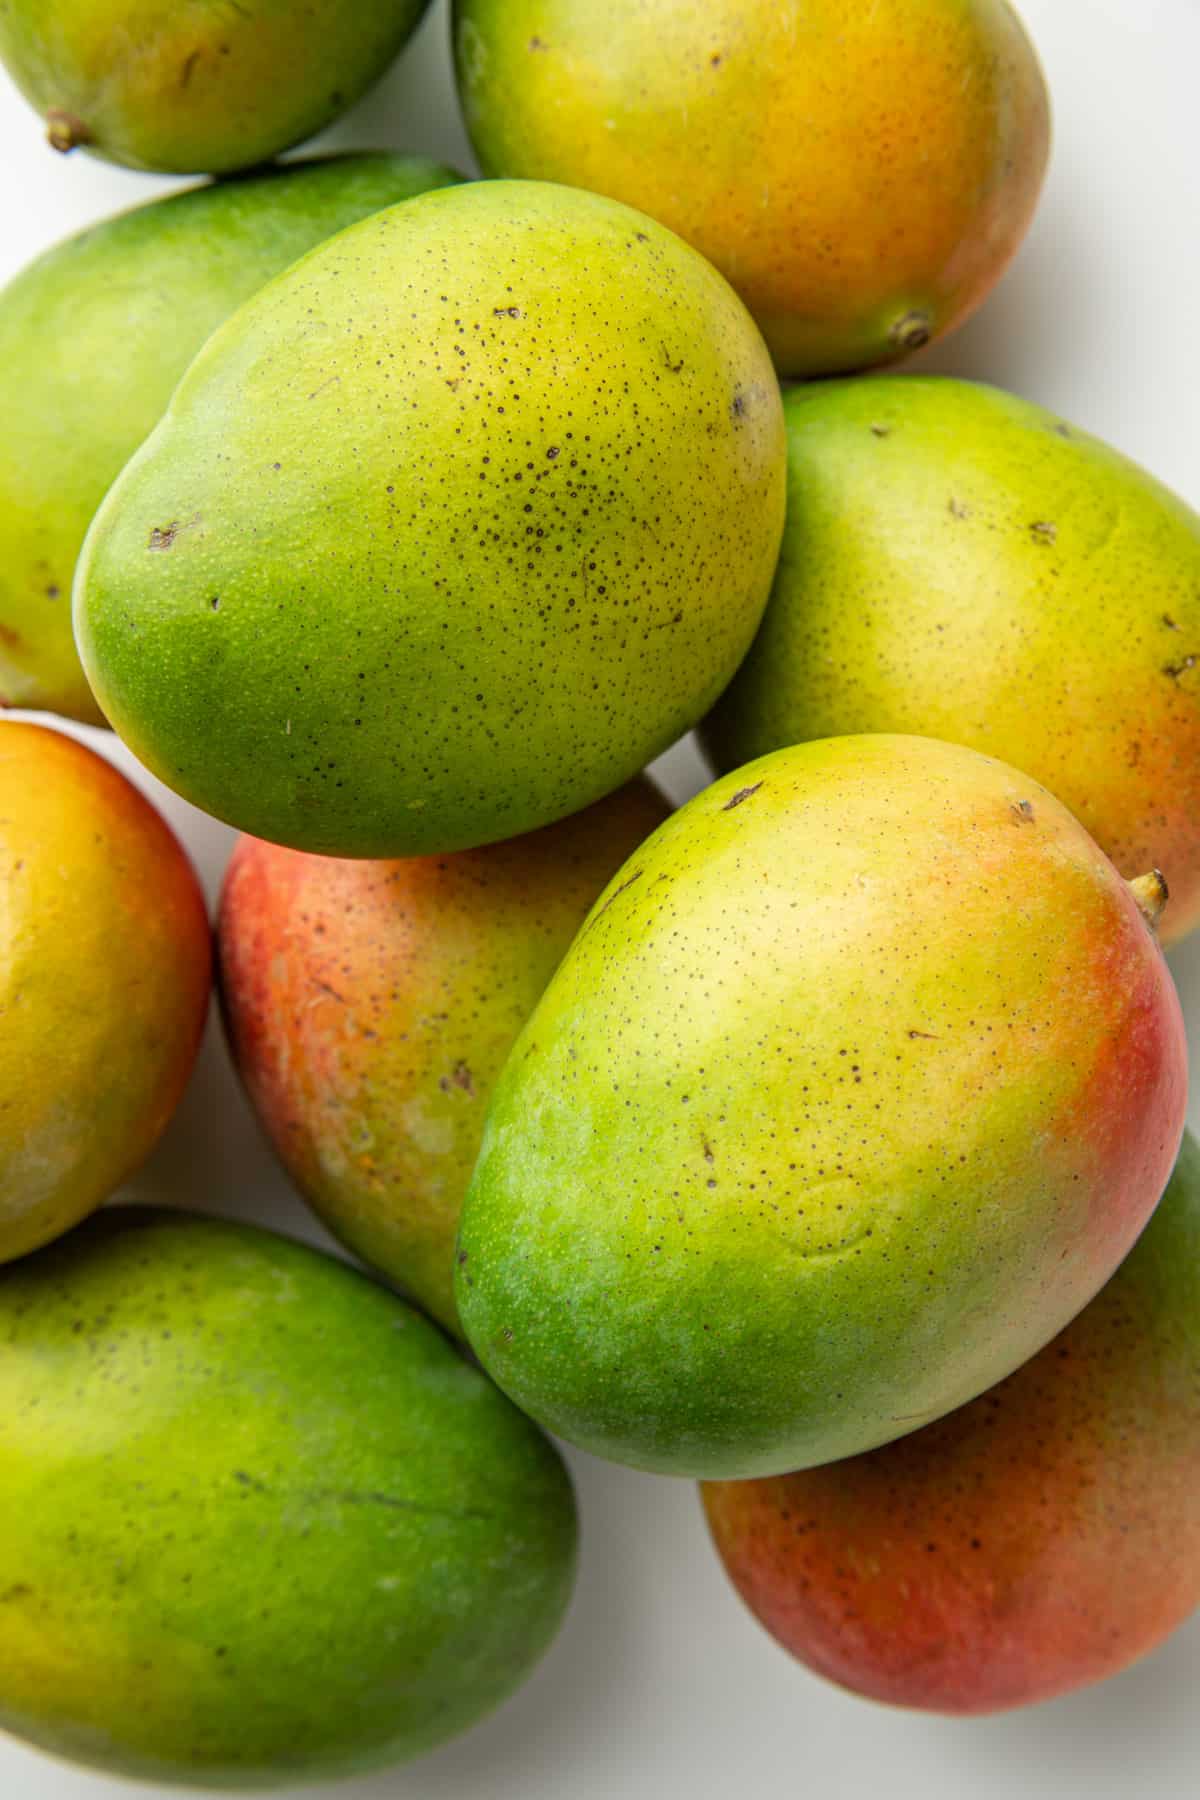 Mangoes piled on top of each other on a white surface.